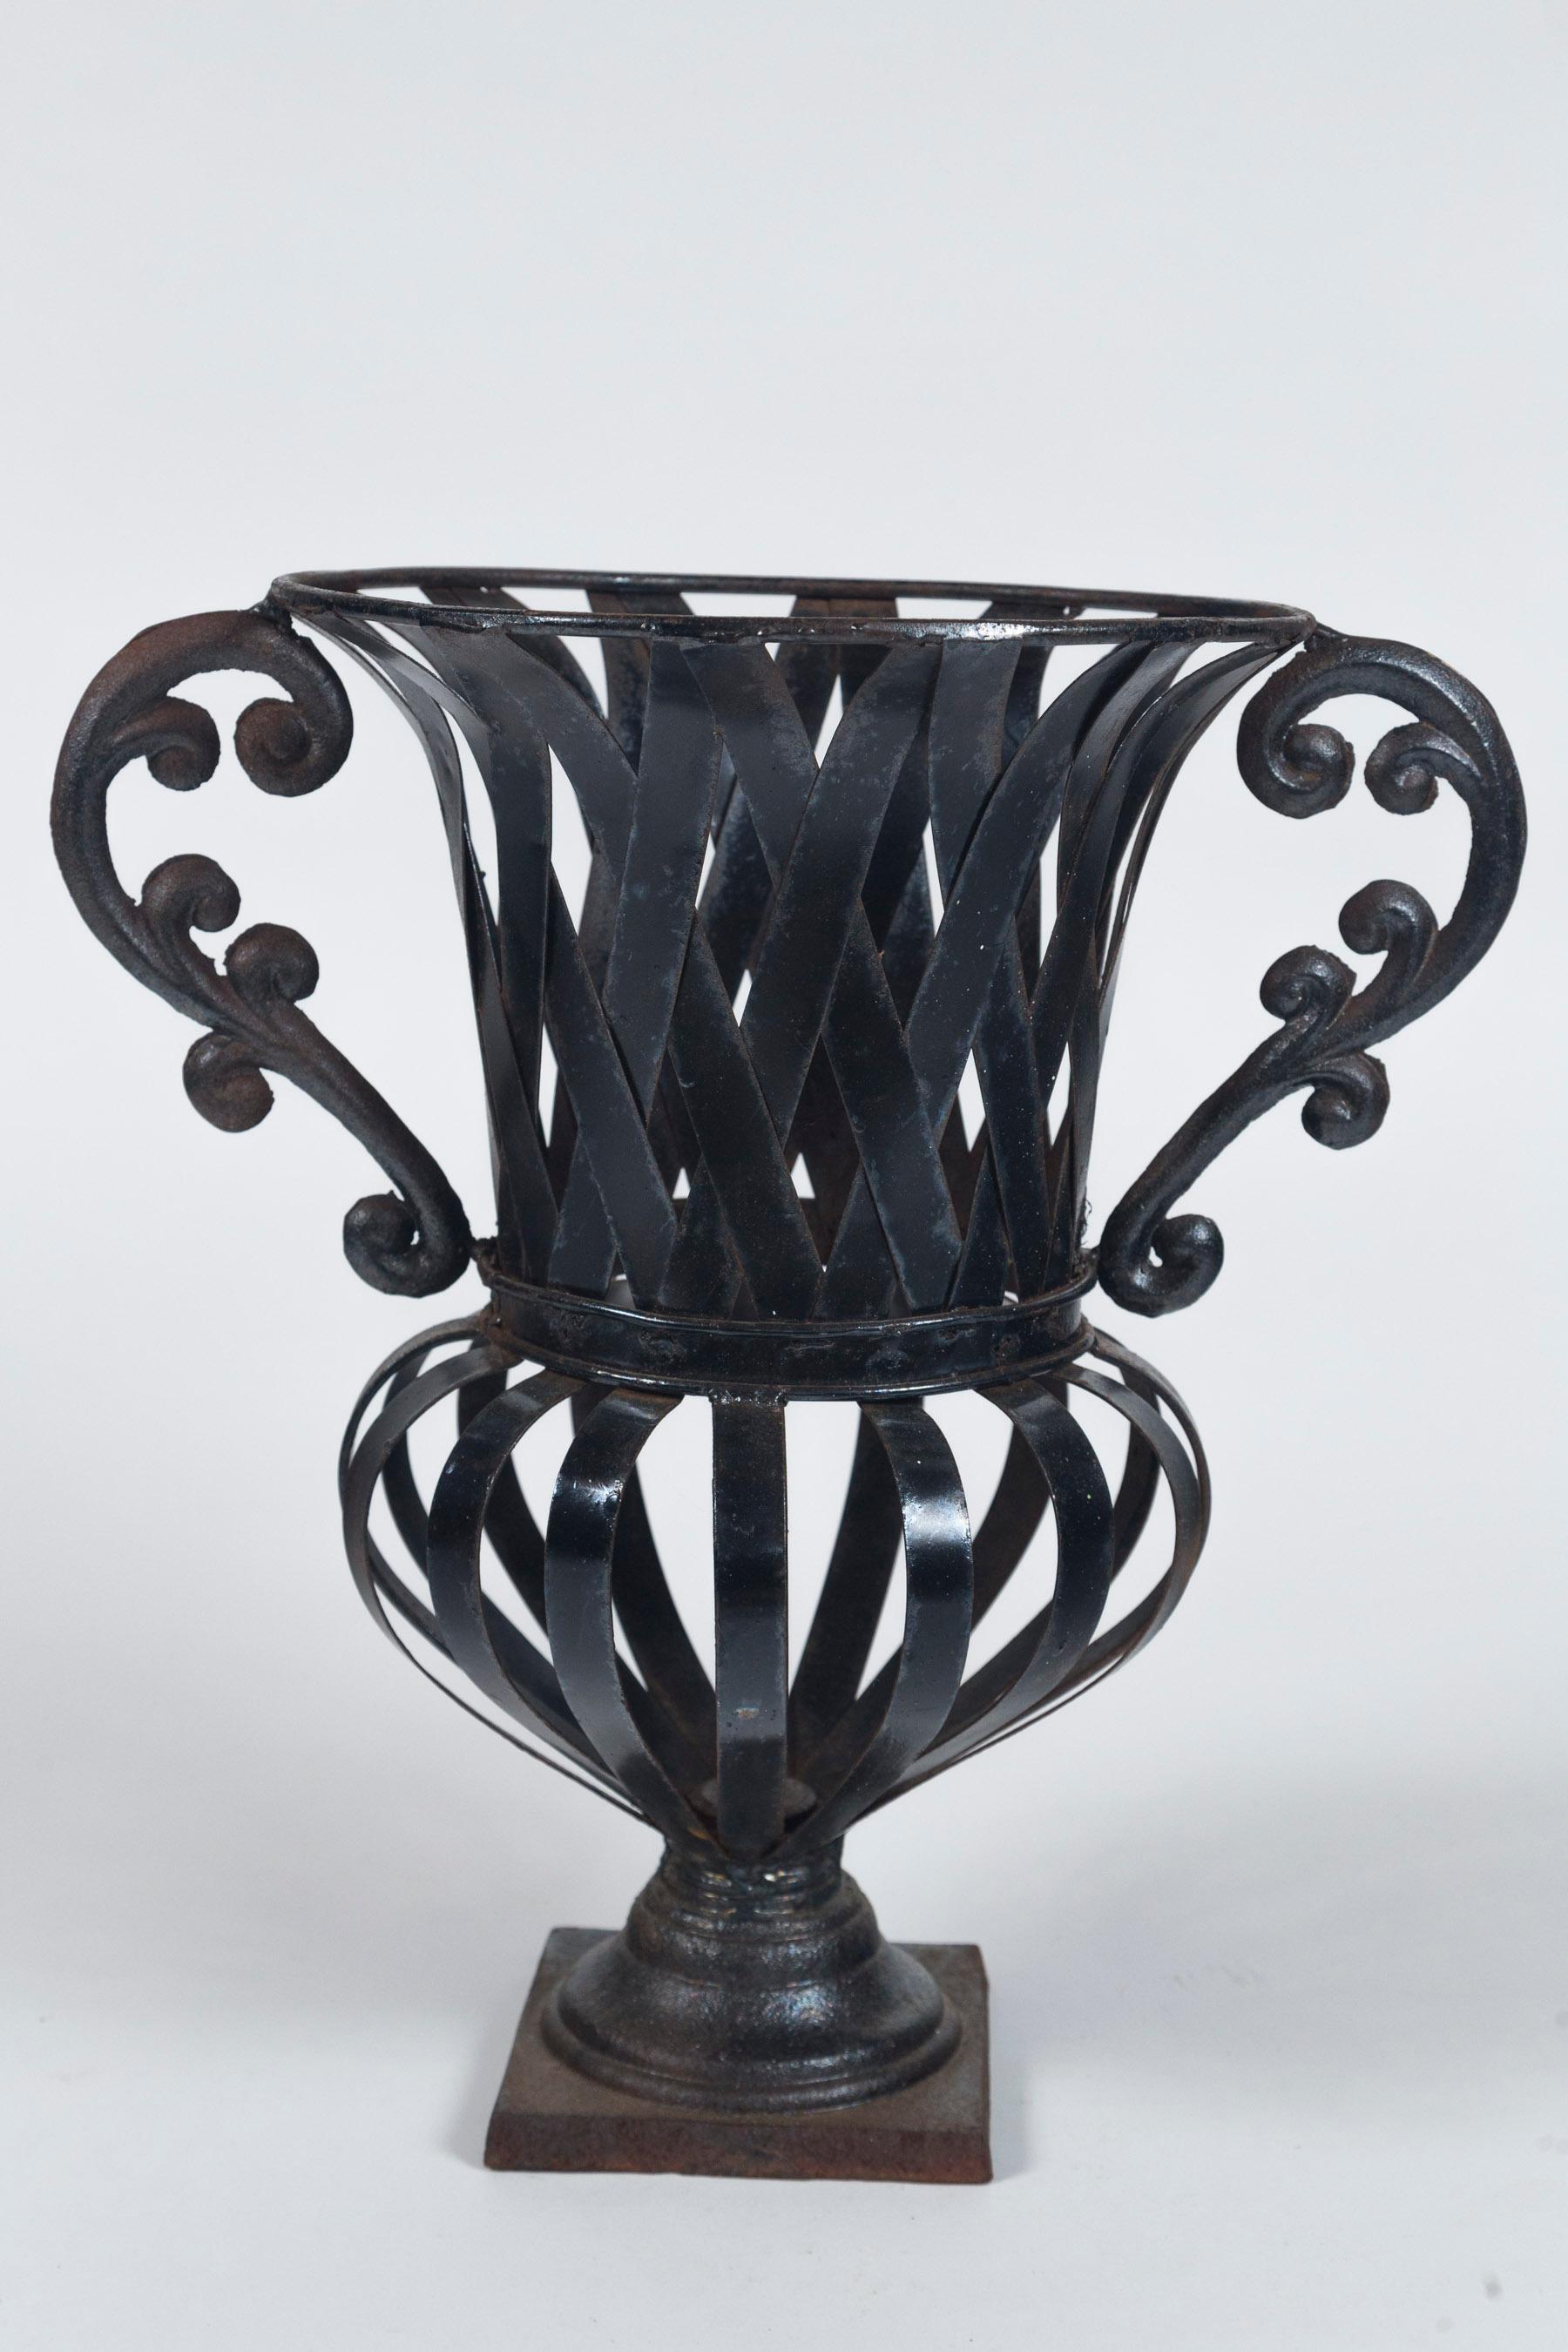 Vintage forged iron Urn, circa 1930's. Classical urn shape on square base with cast iron handles.